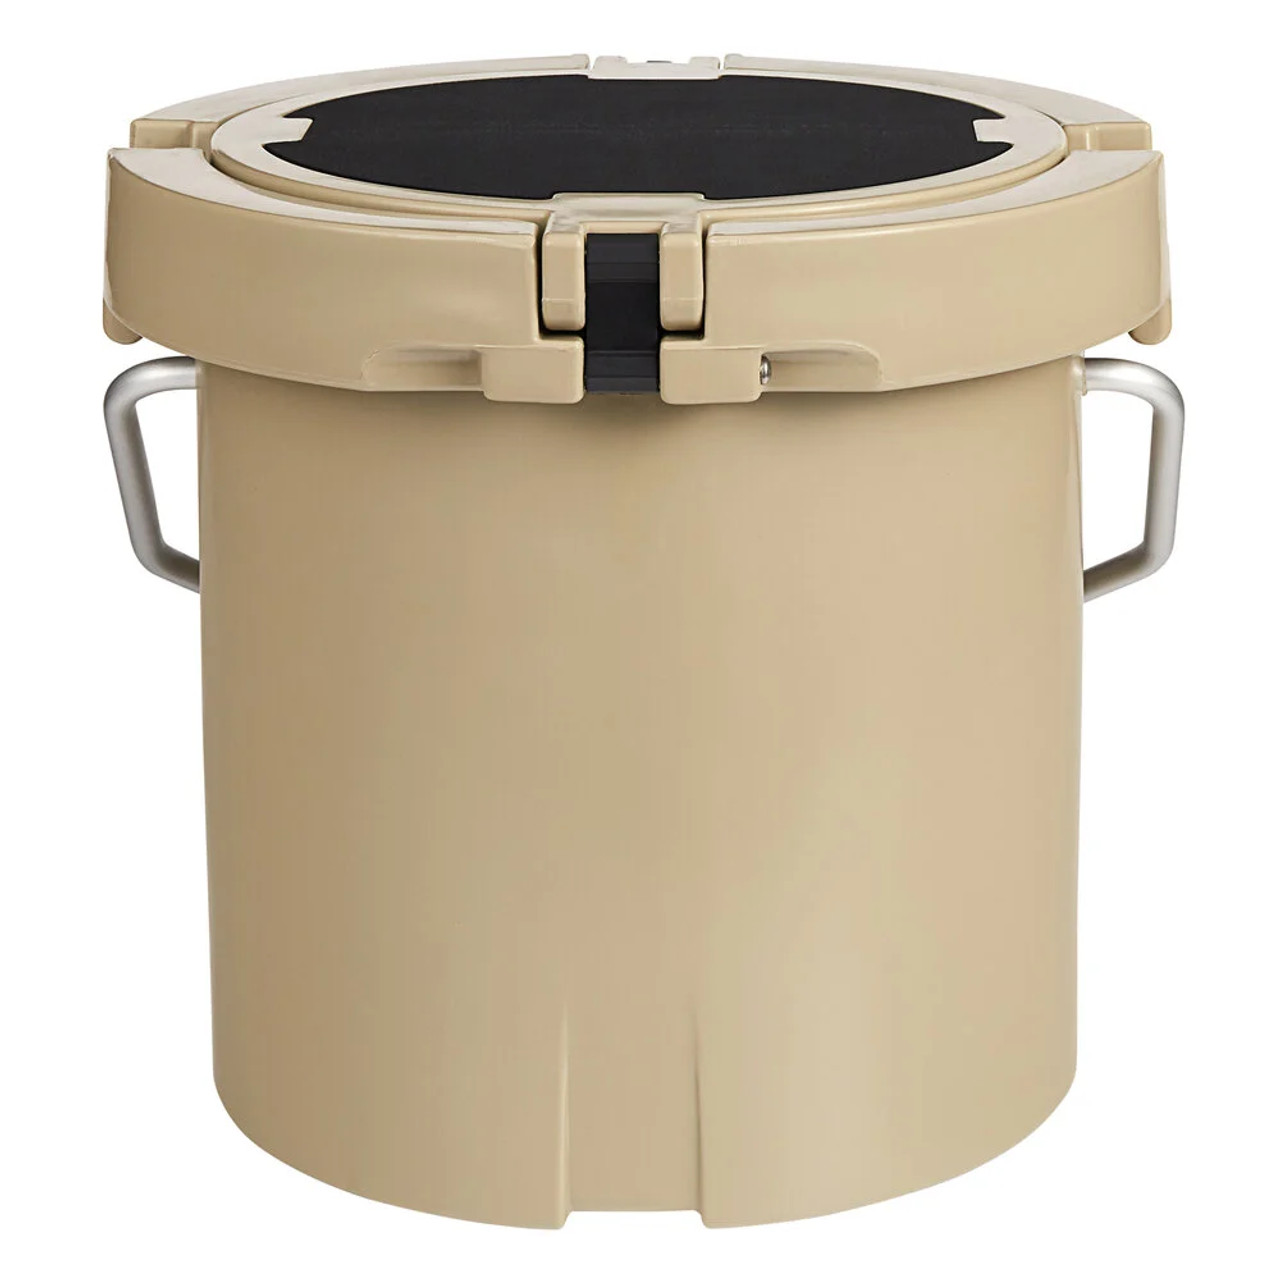 Round Rotomolded Extreme Outdoor Cooler / Ice Chest-Beige 20 Qt. 